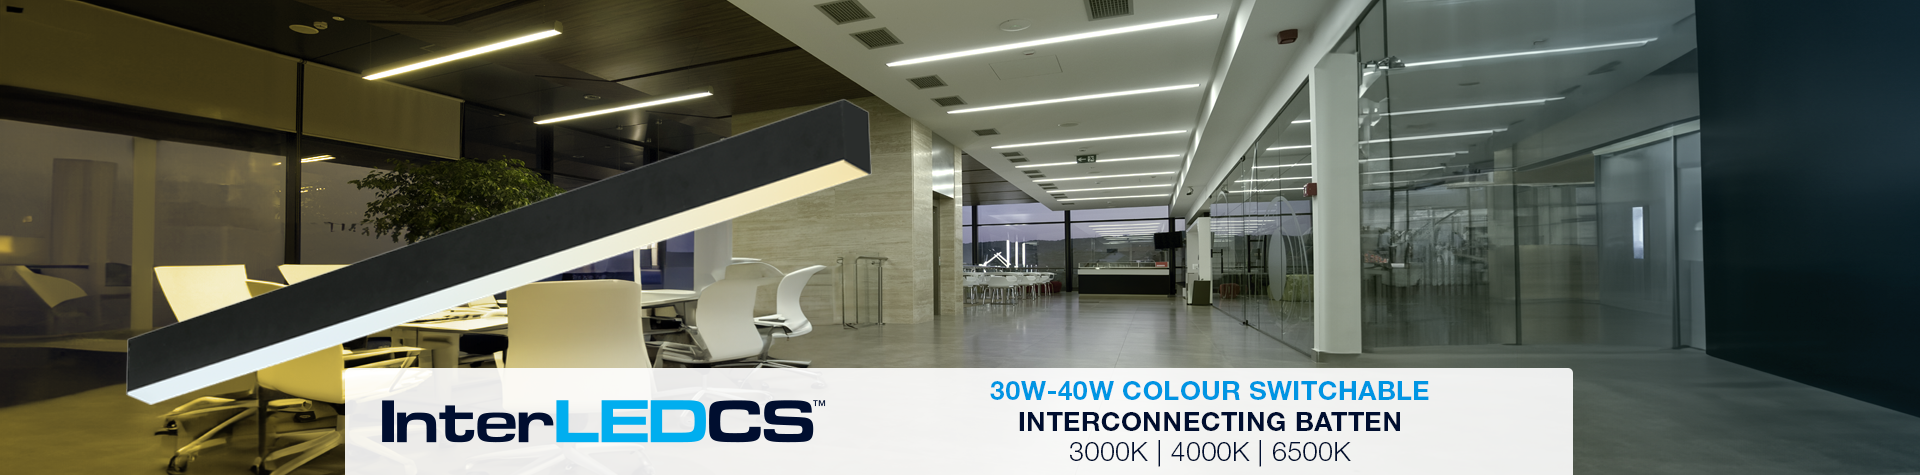 Show products in category InterLED Now Offering Colour Switchable Technology